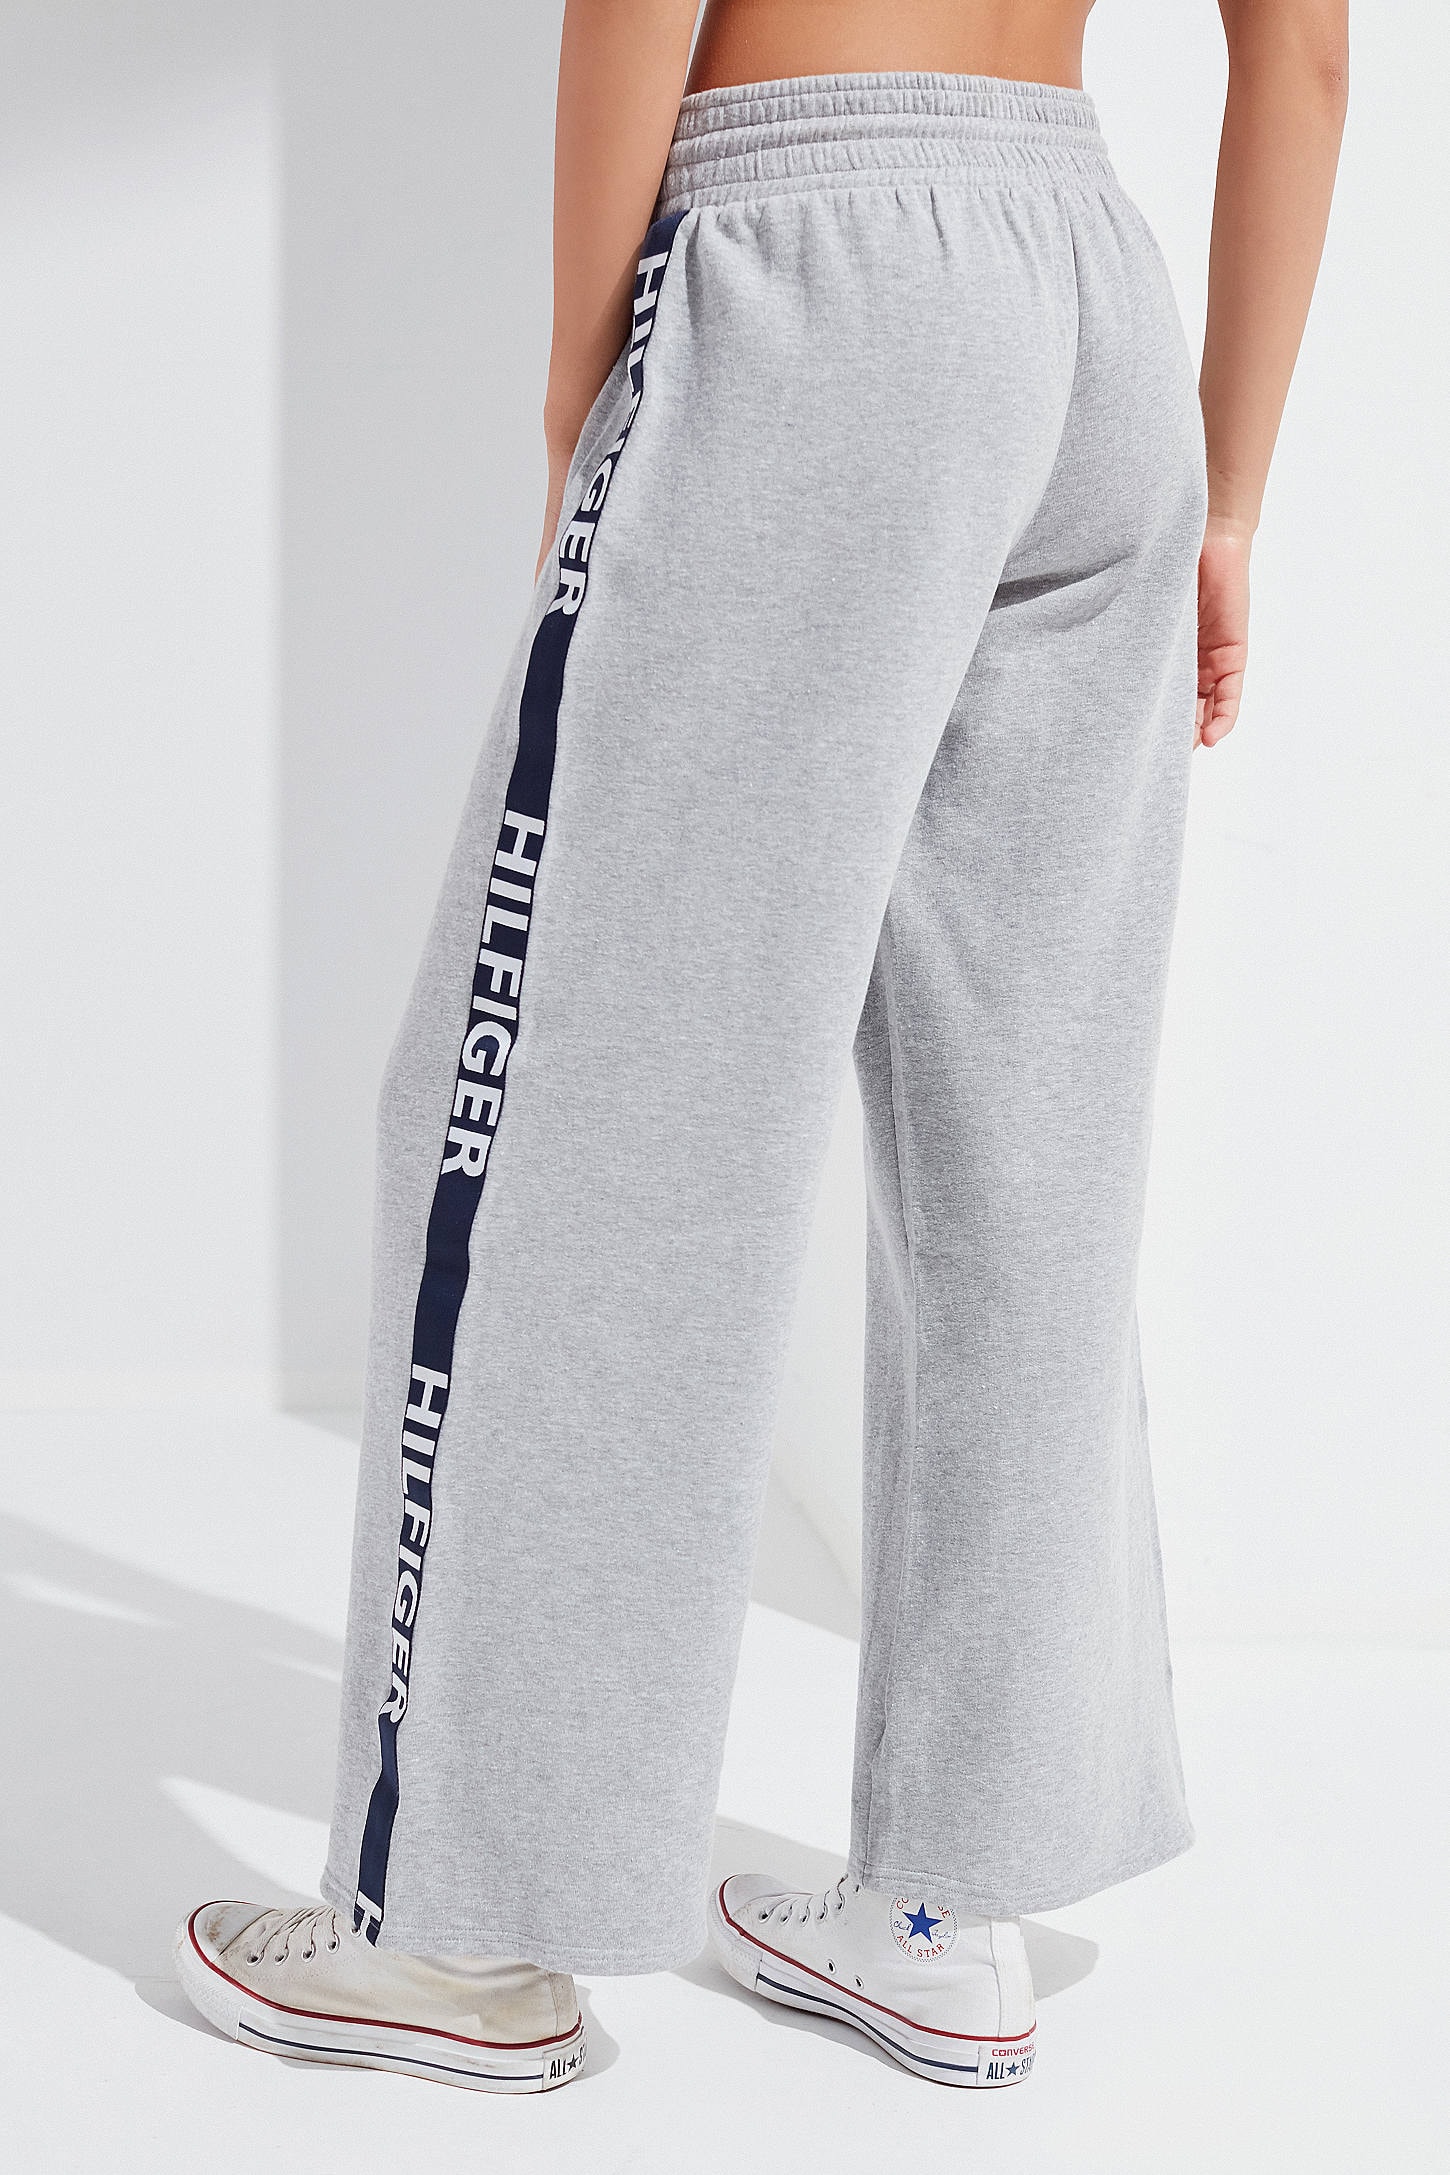 Tommy Hilfiger x Urban Outfitters Logo Set